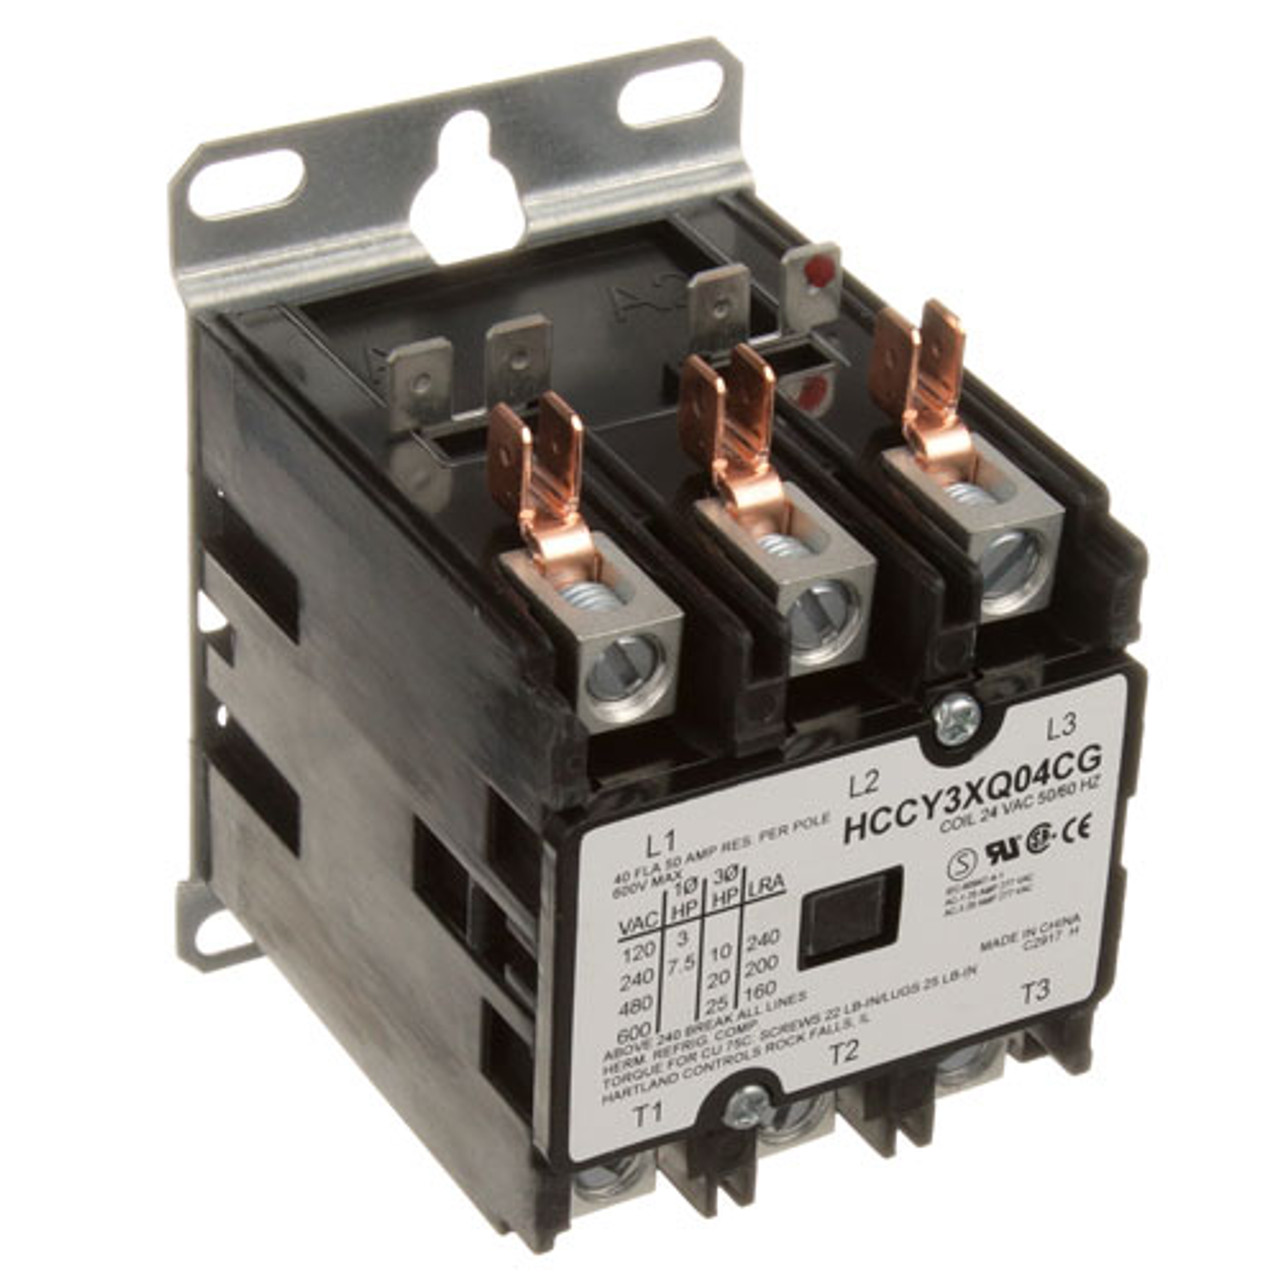 Contactor 3P 40/50A 24V - Replacement Part For Lbc Bakery Equipment 30700-17